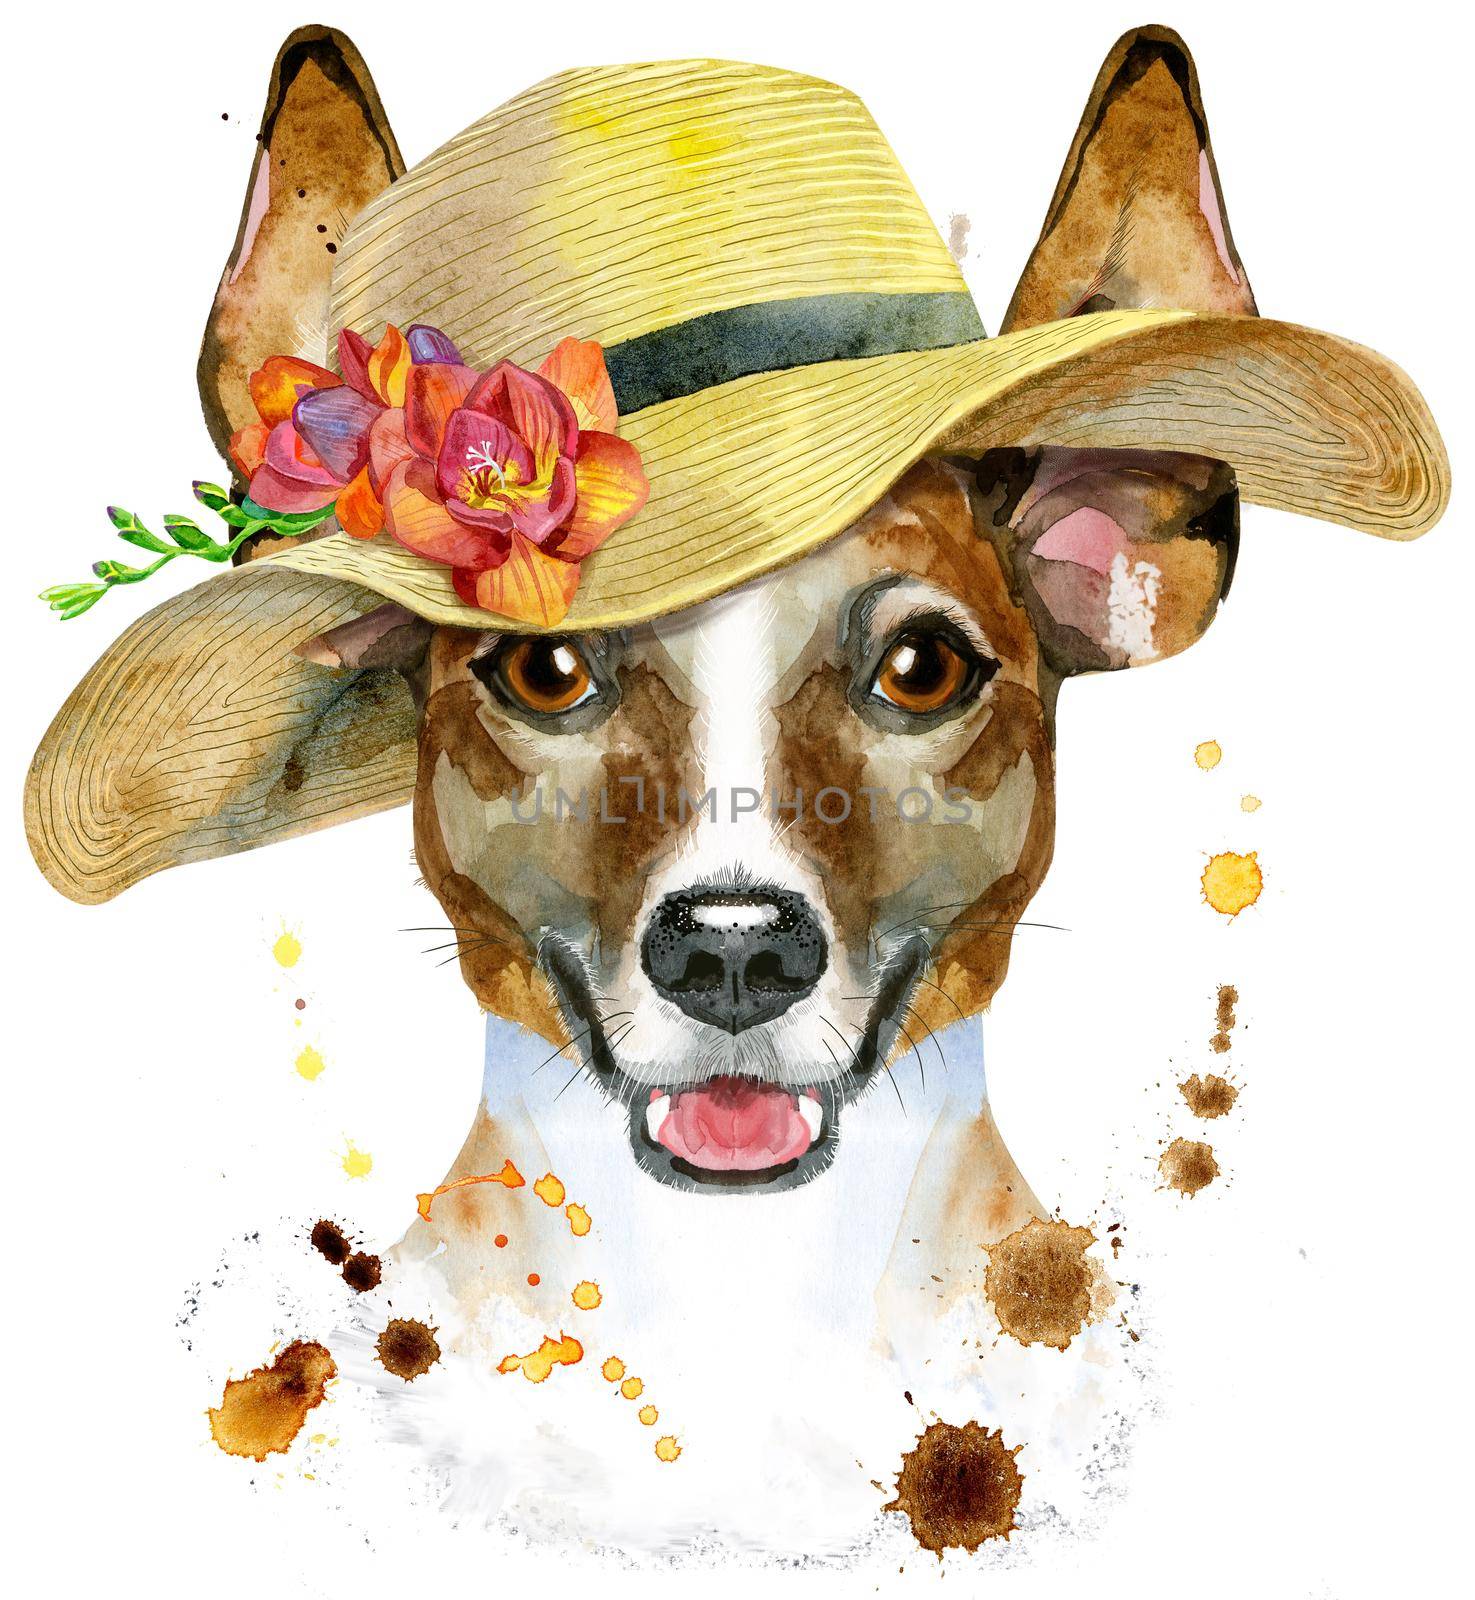 Cute Dog in summer hat. Dog T-shirt graphics. watercolor jack russell terrier illustration